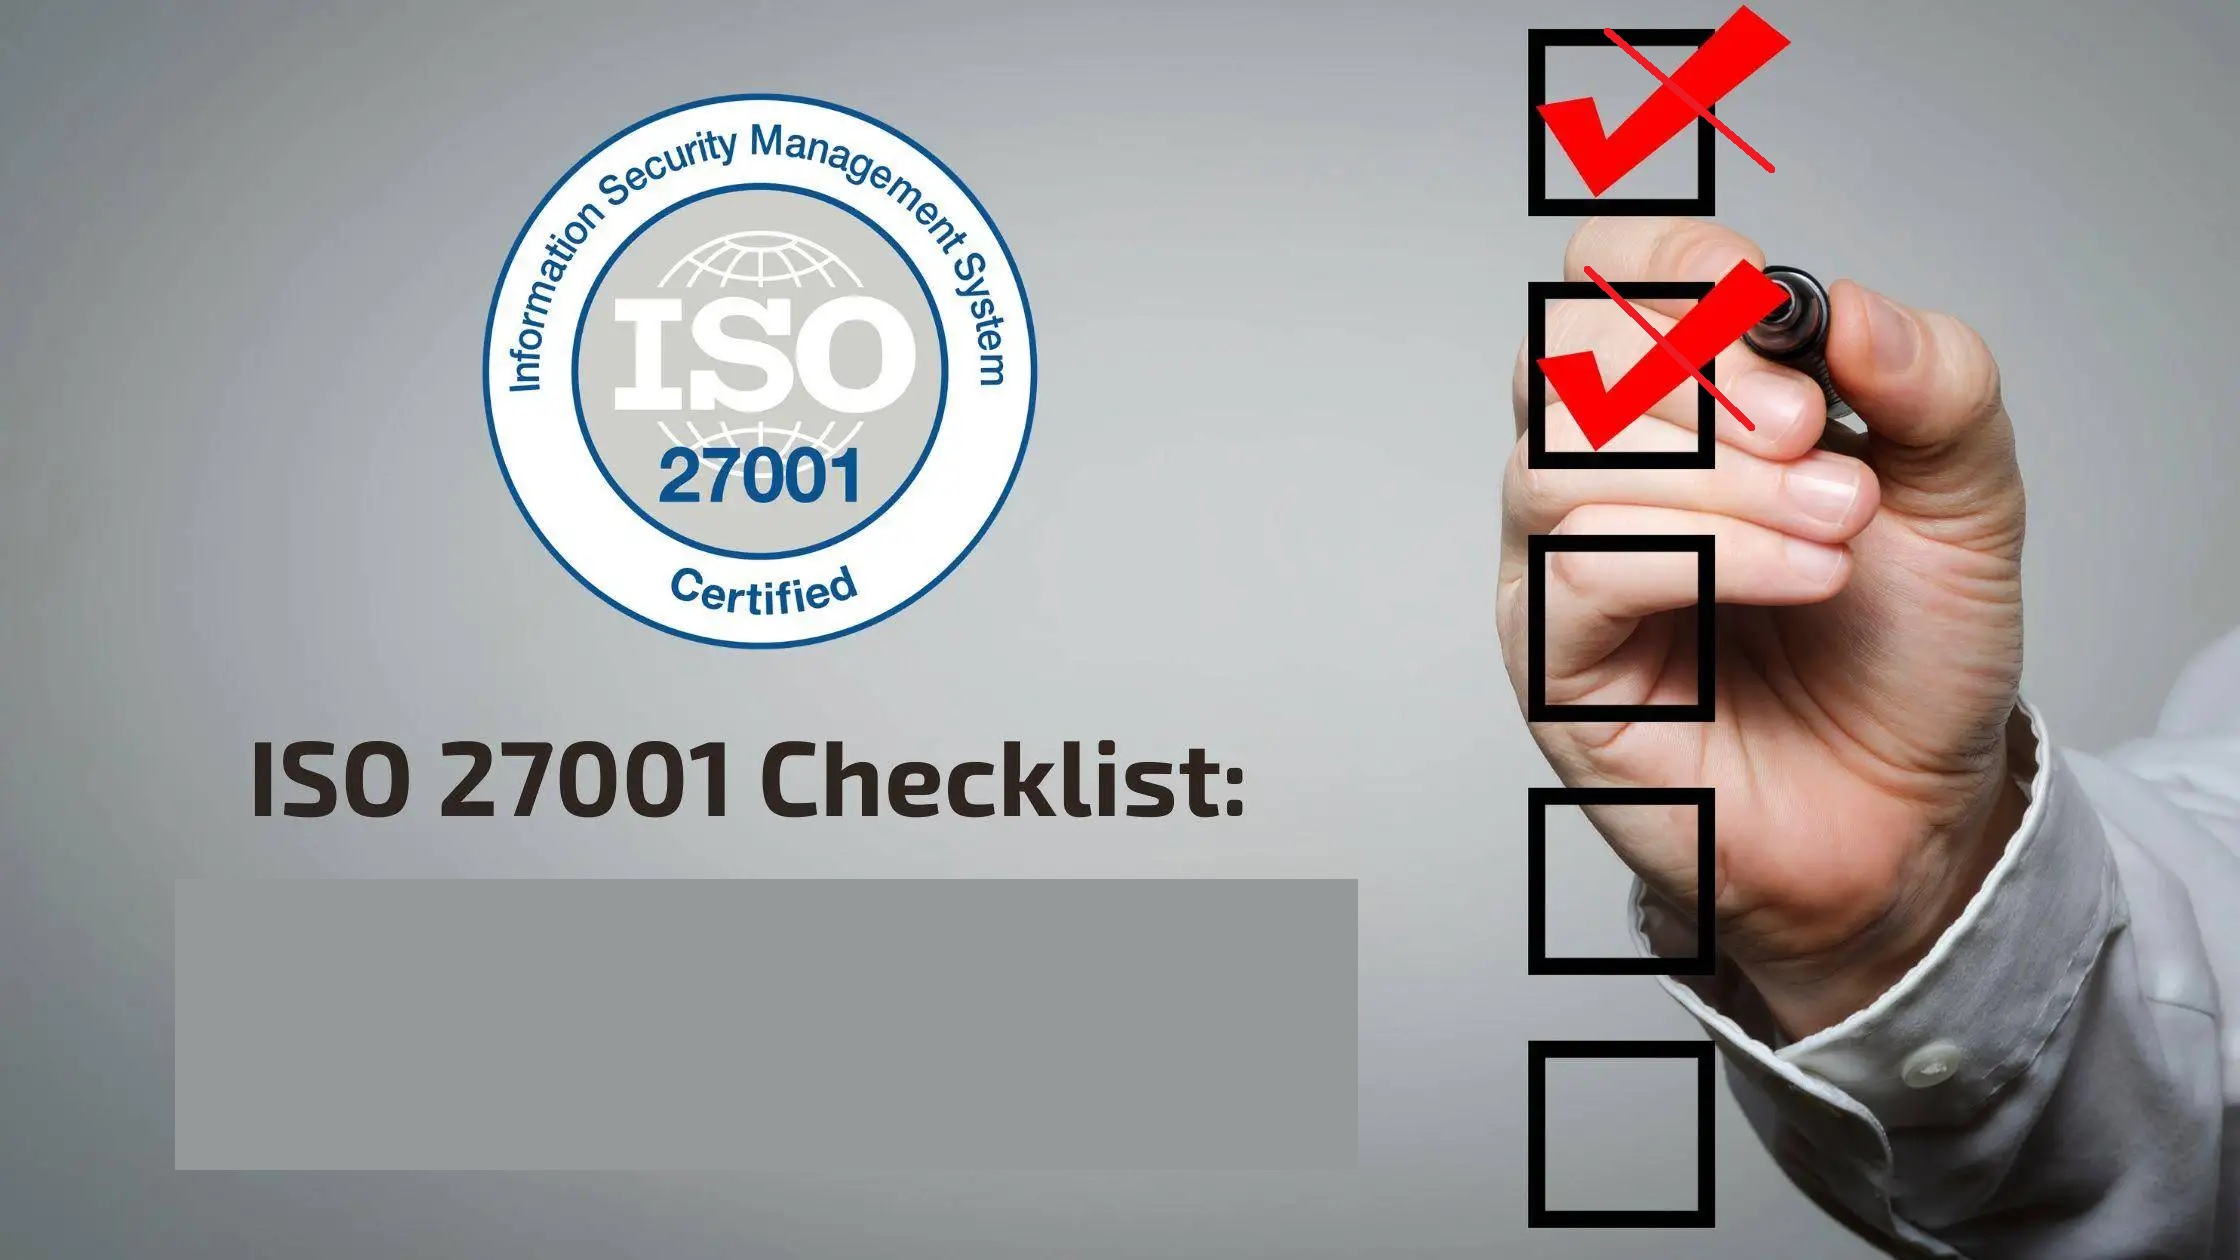 Why ISO27001 Internal Audit Should Not Be CheckList Based?